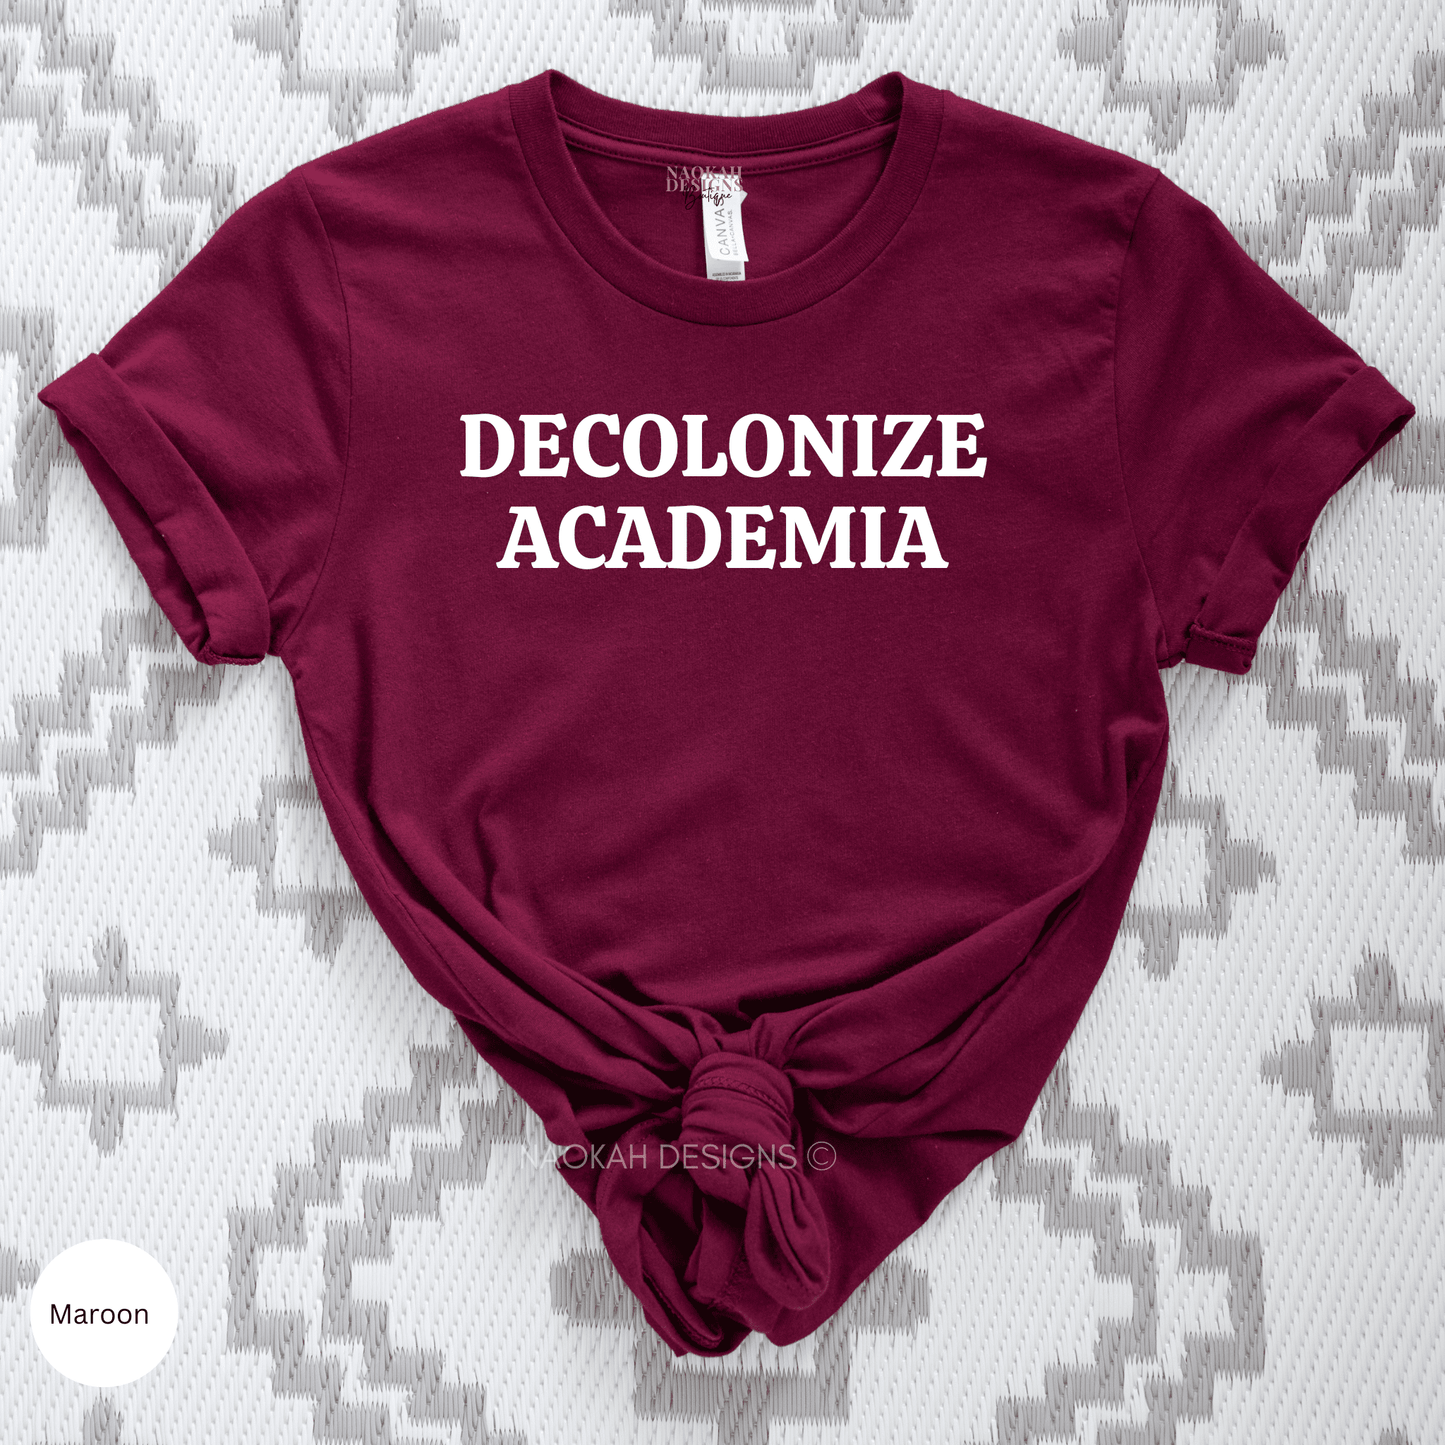  Decolonize Academia Shirt, Decolonize Shirt, Ancestral Teaching, Indigenous, Native Pride, You are on Native Land, You are on Indigenous Land, Colonialism, Native Teaching, Indigenous Owned, Anti racist, Anti Colonialism